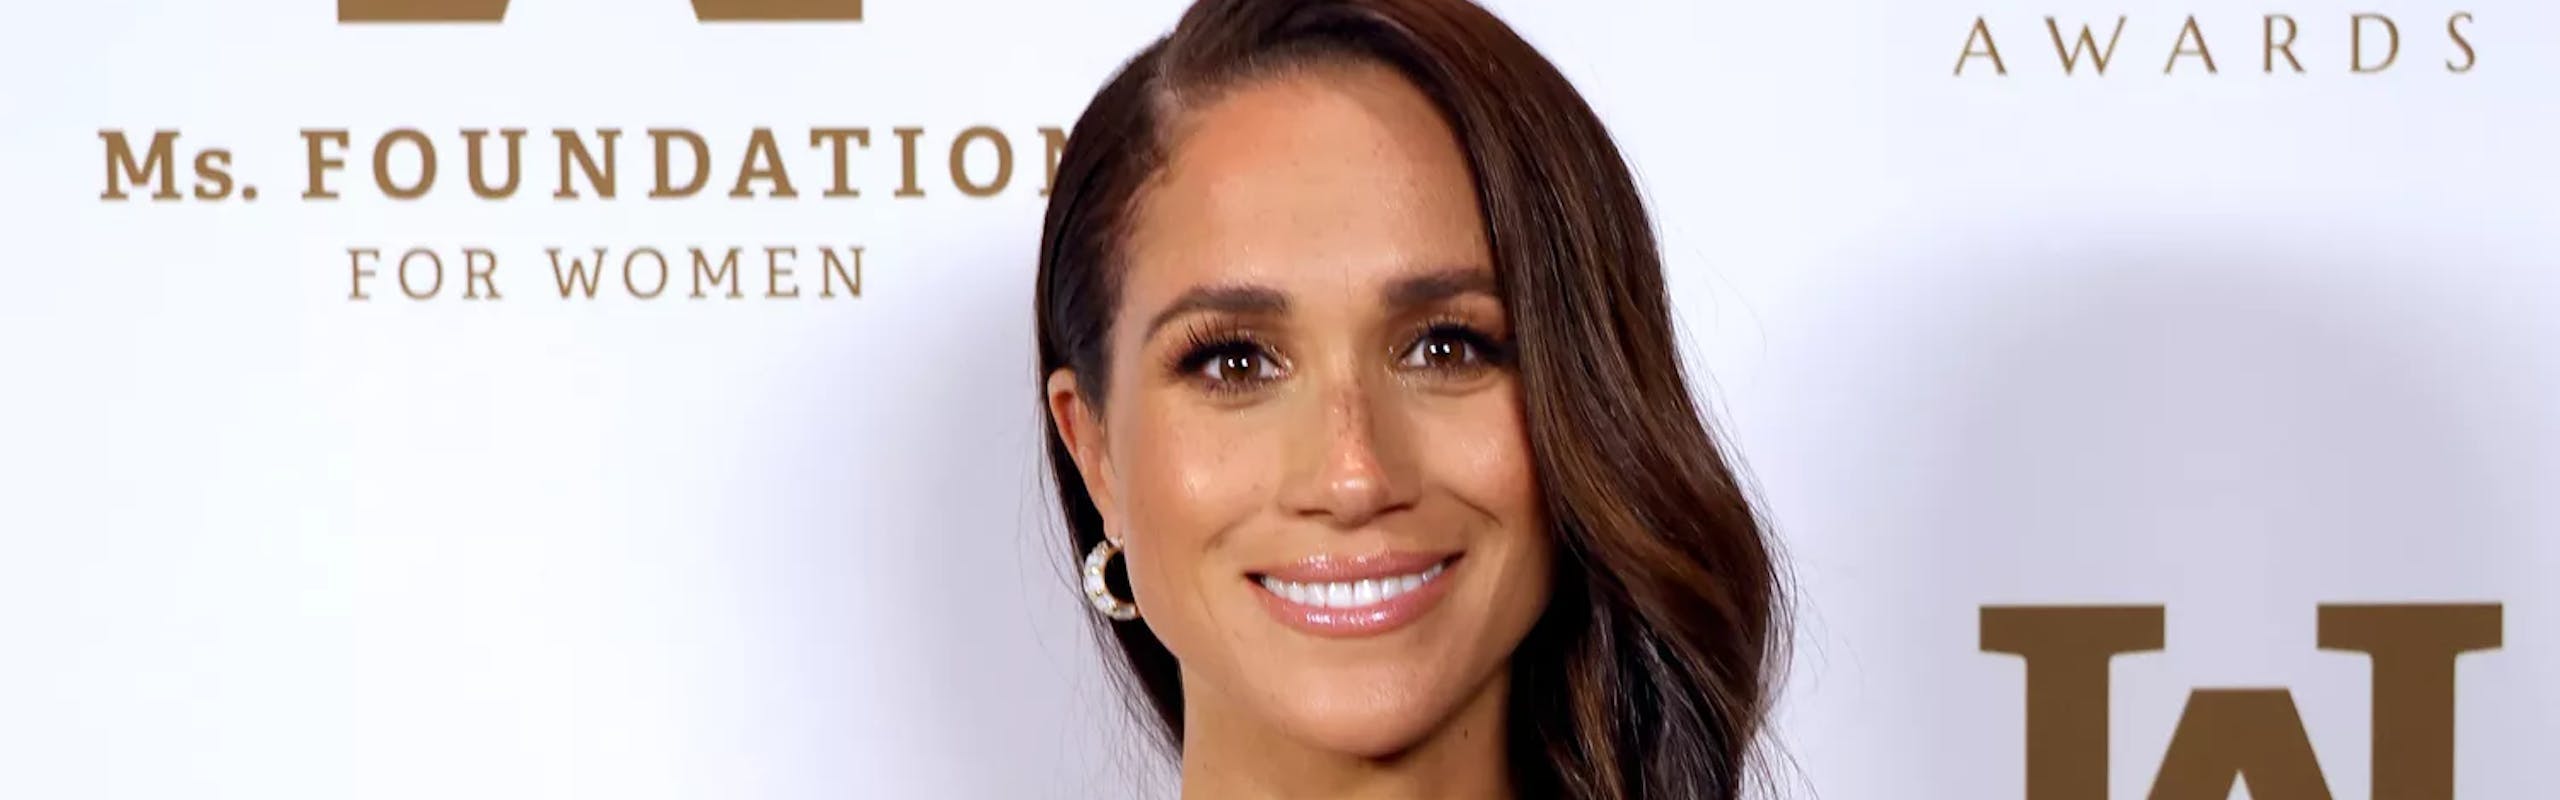 meghan markle smiling at the camera